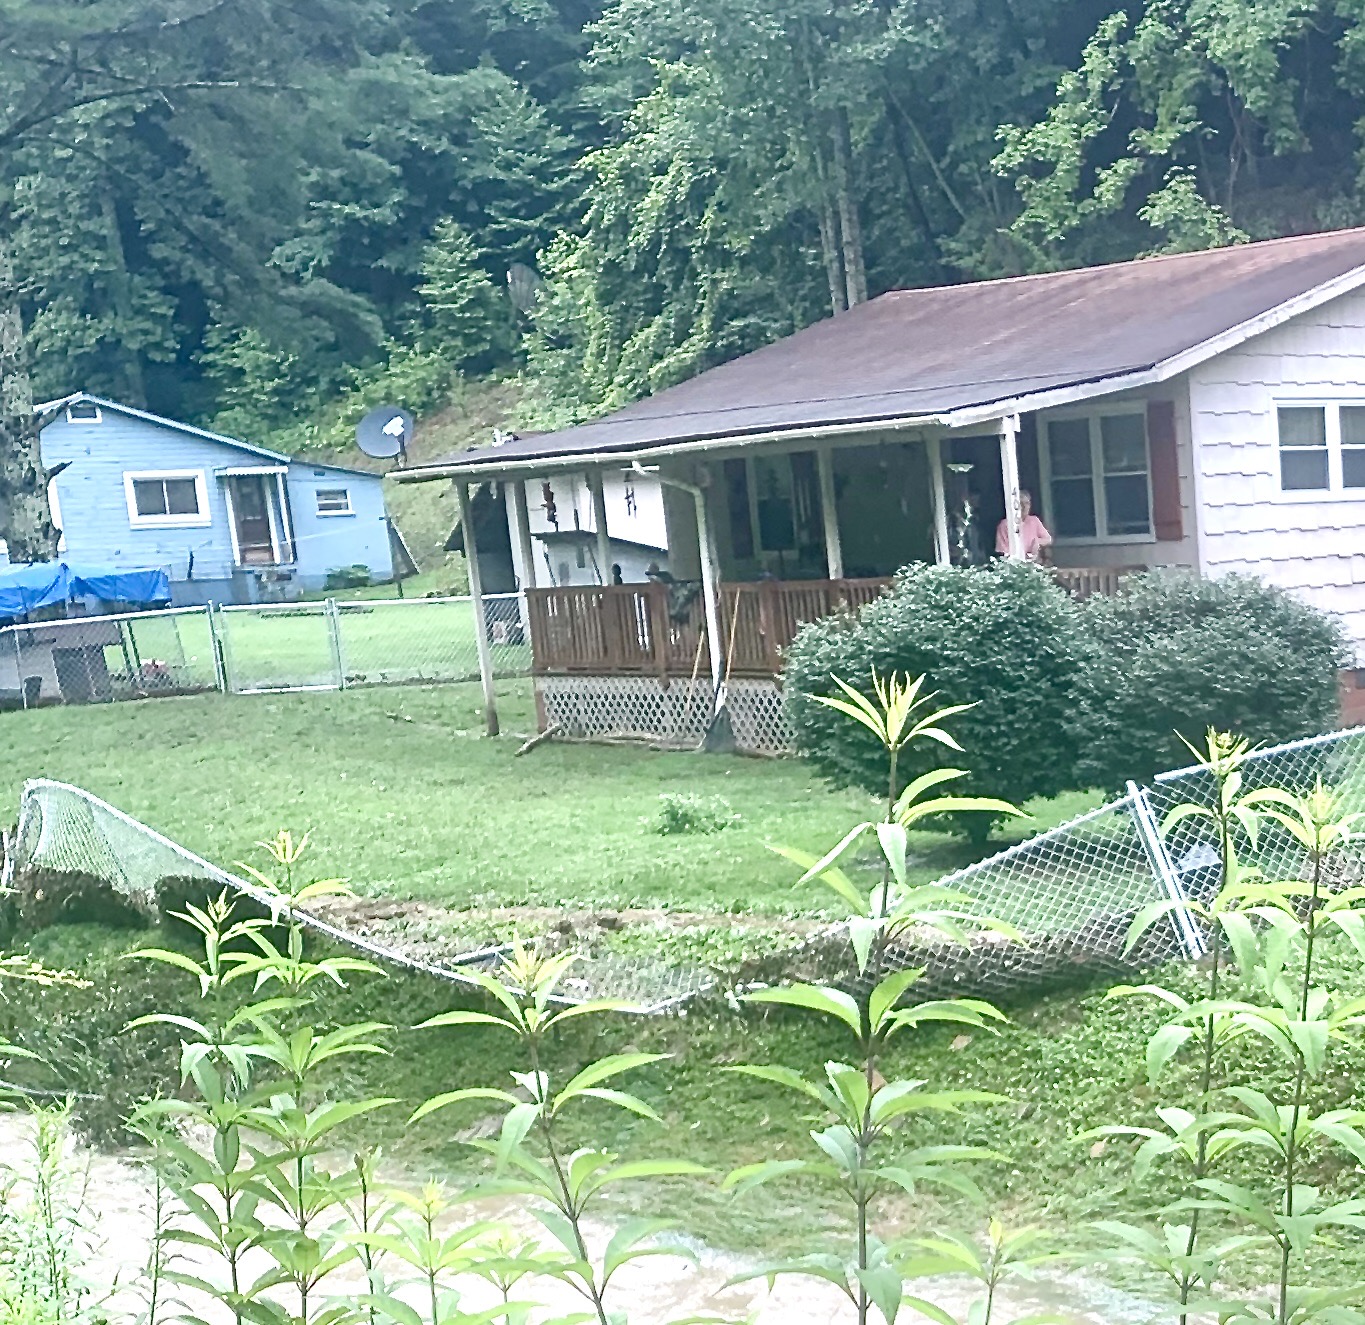 A woman in a pink shirt looks out from the corner a porch toward a chain link fence damaged by flood water and the creek just beyond it.